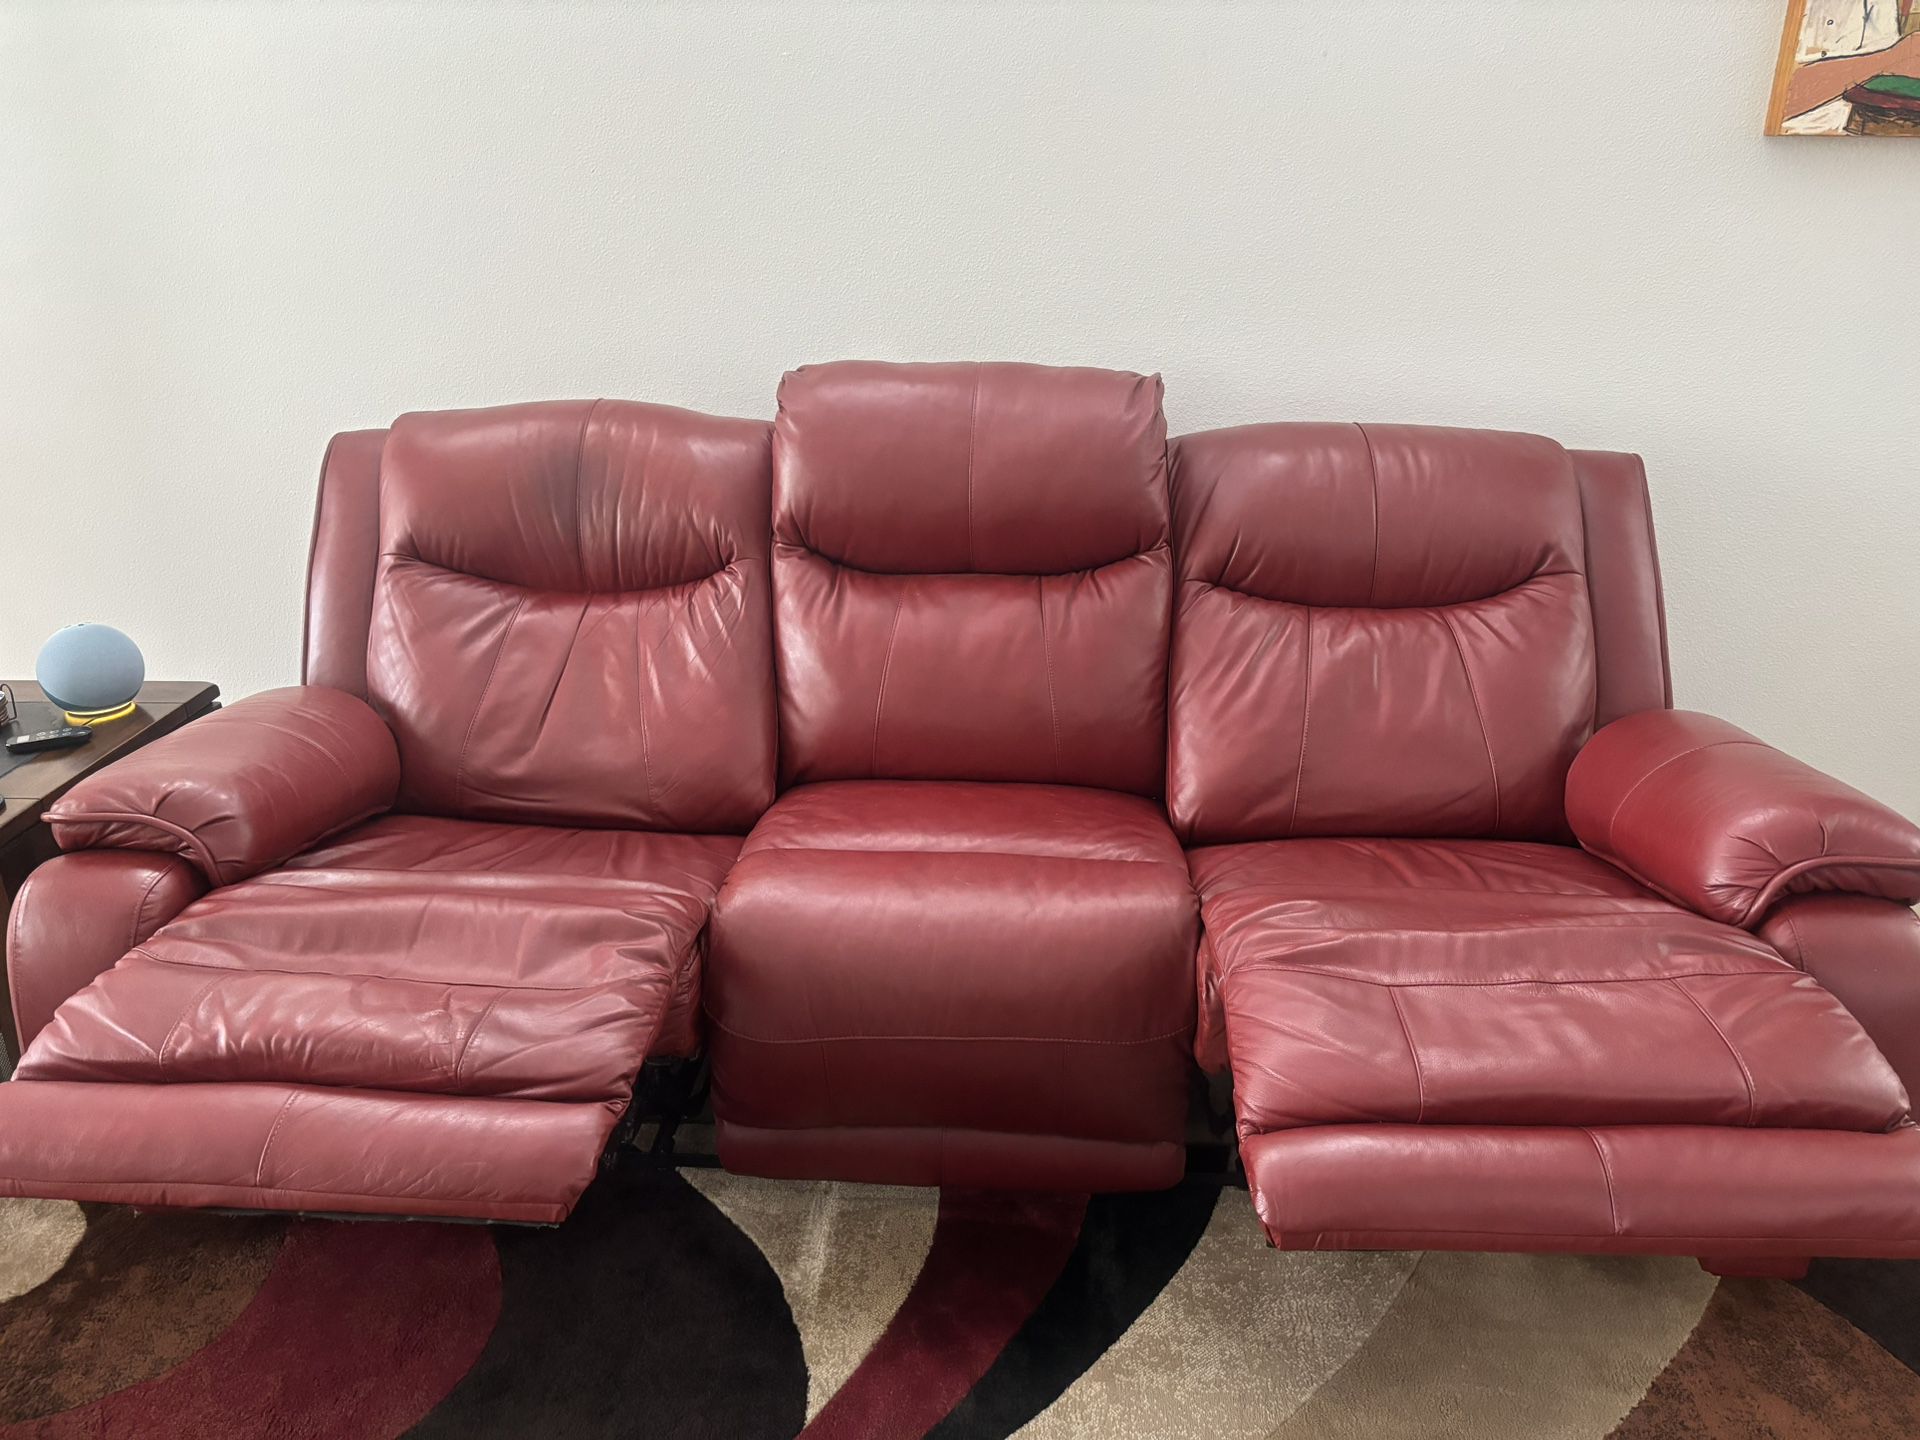 Couch, Double Recliner - New Price